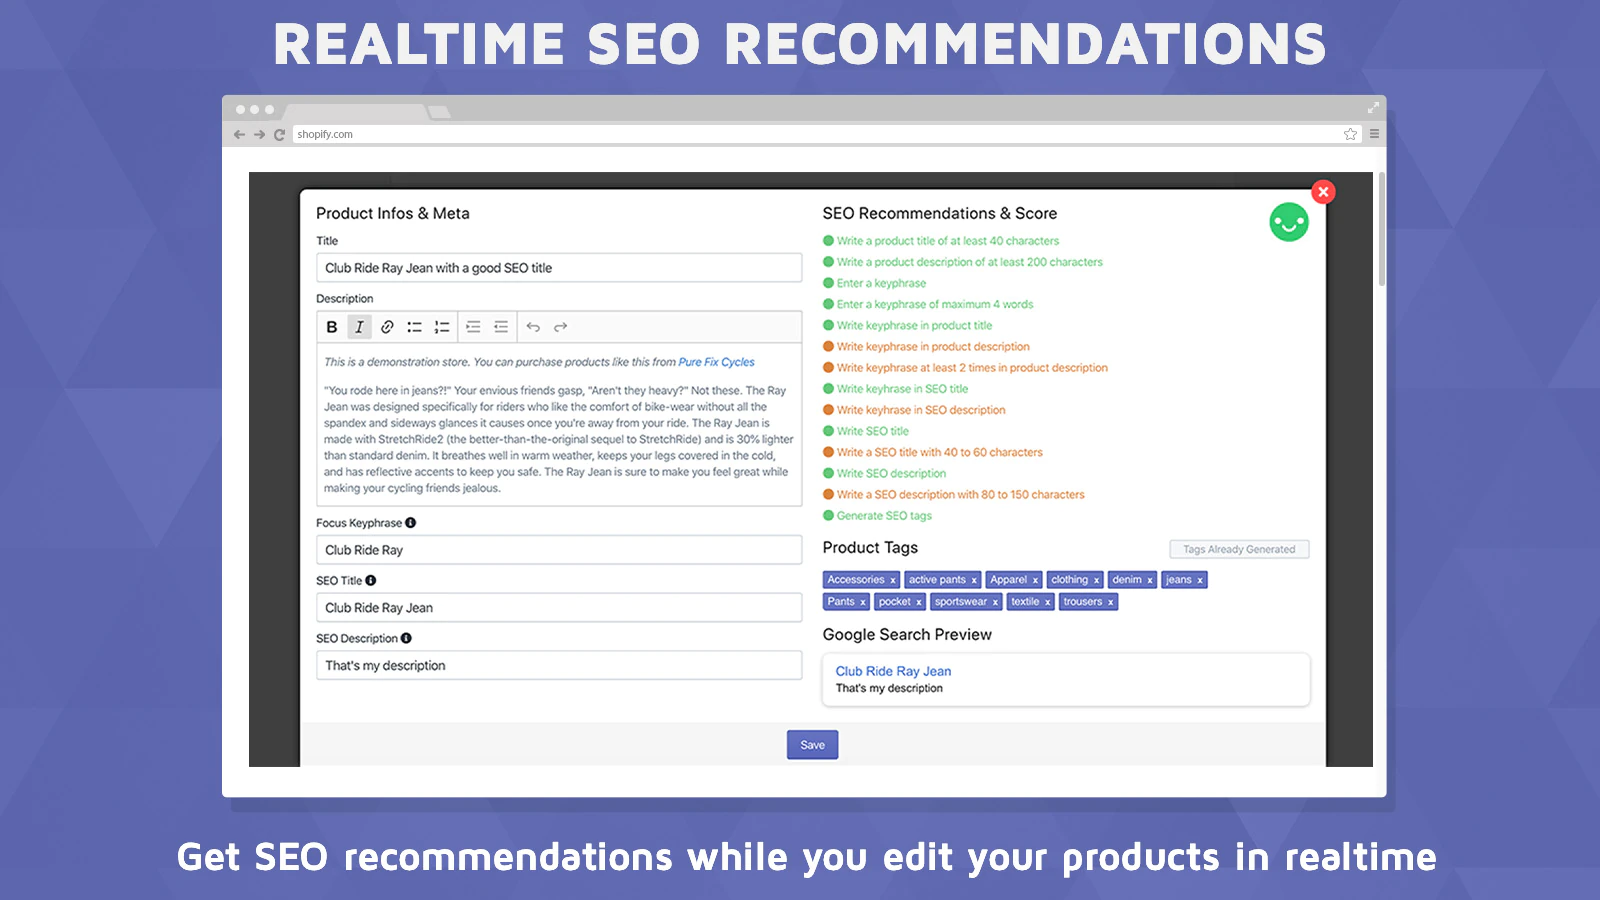 go-seo-seo-products-optimizer-seo-recommendations